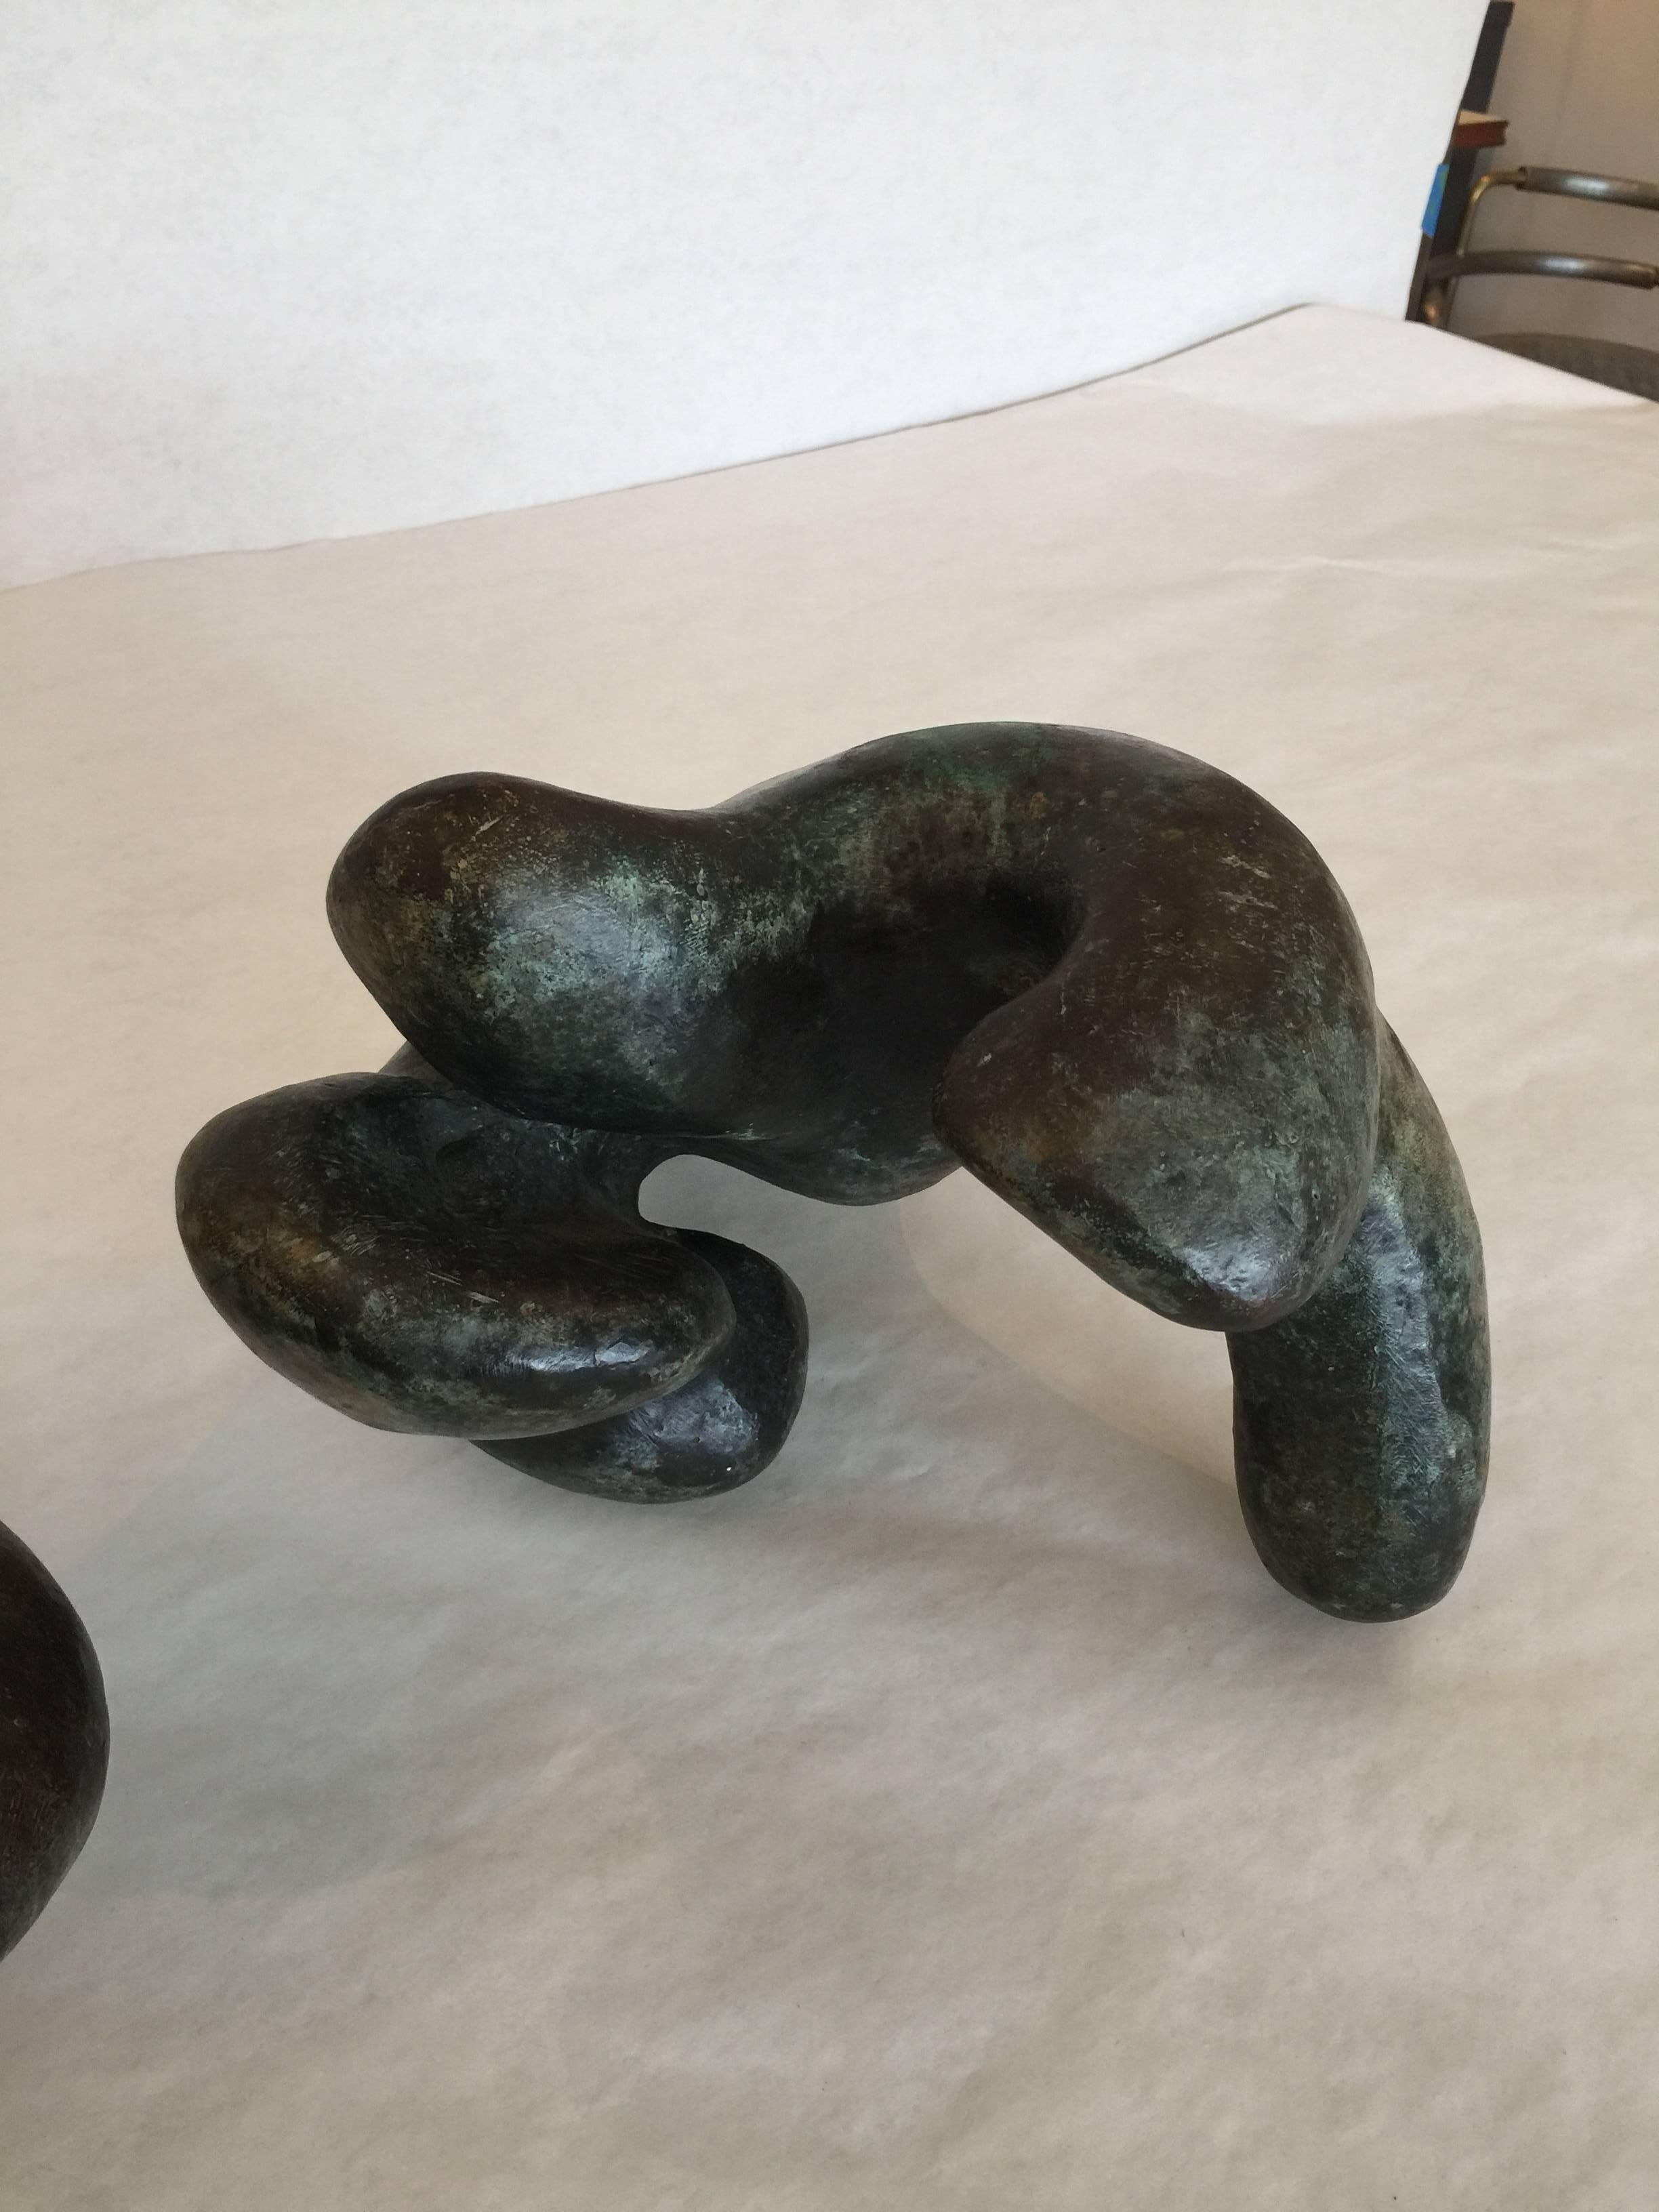 Exceptional scale and patina. These bronze abstract/ figural sculptures are quite large, made for tabletop or display. Can be sold together or individually - Priced individually.